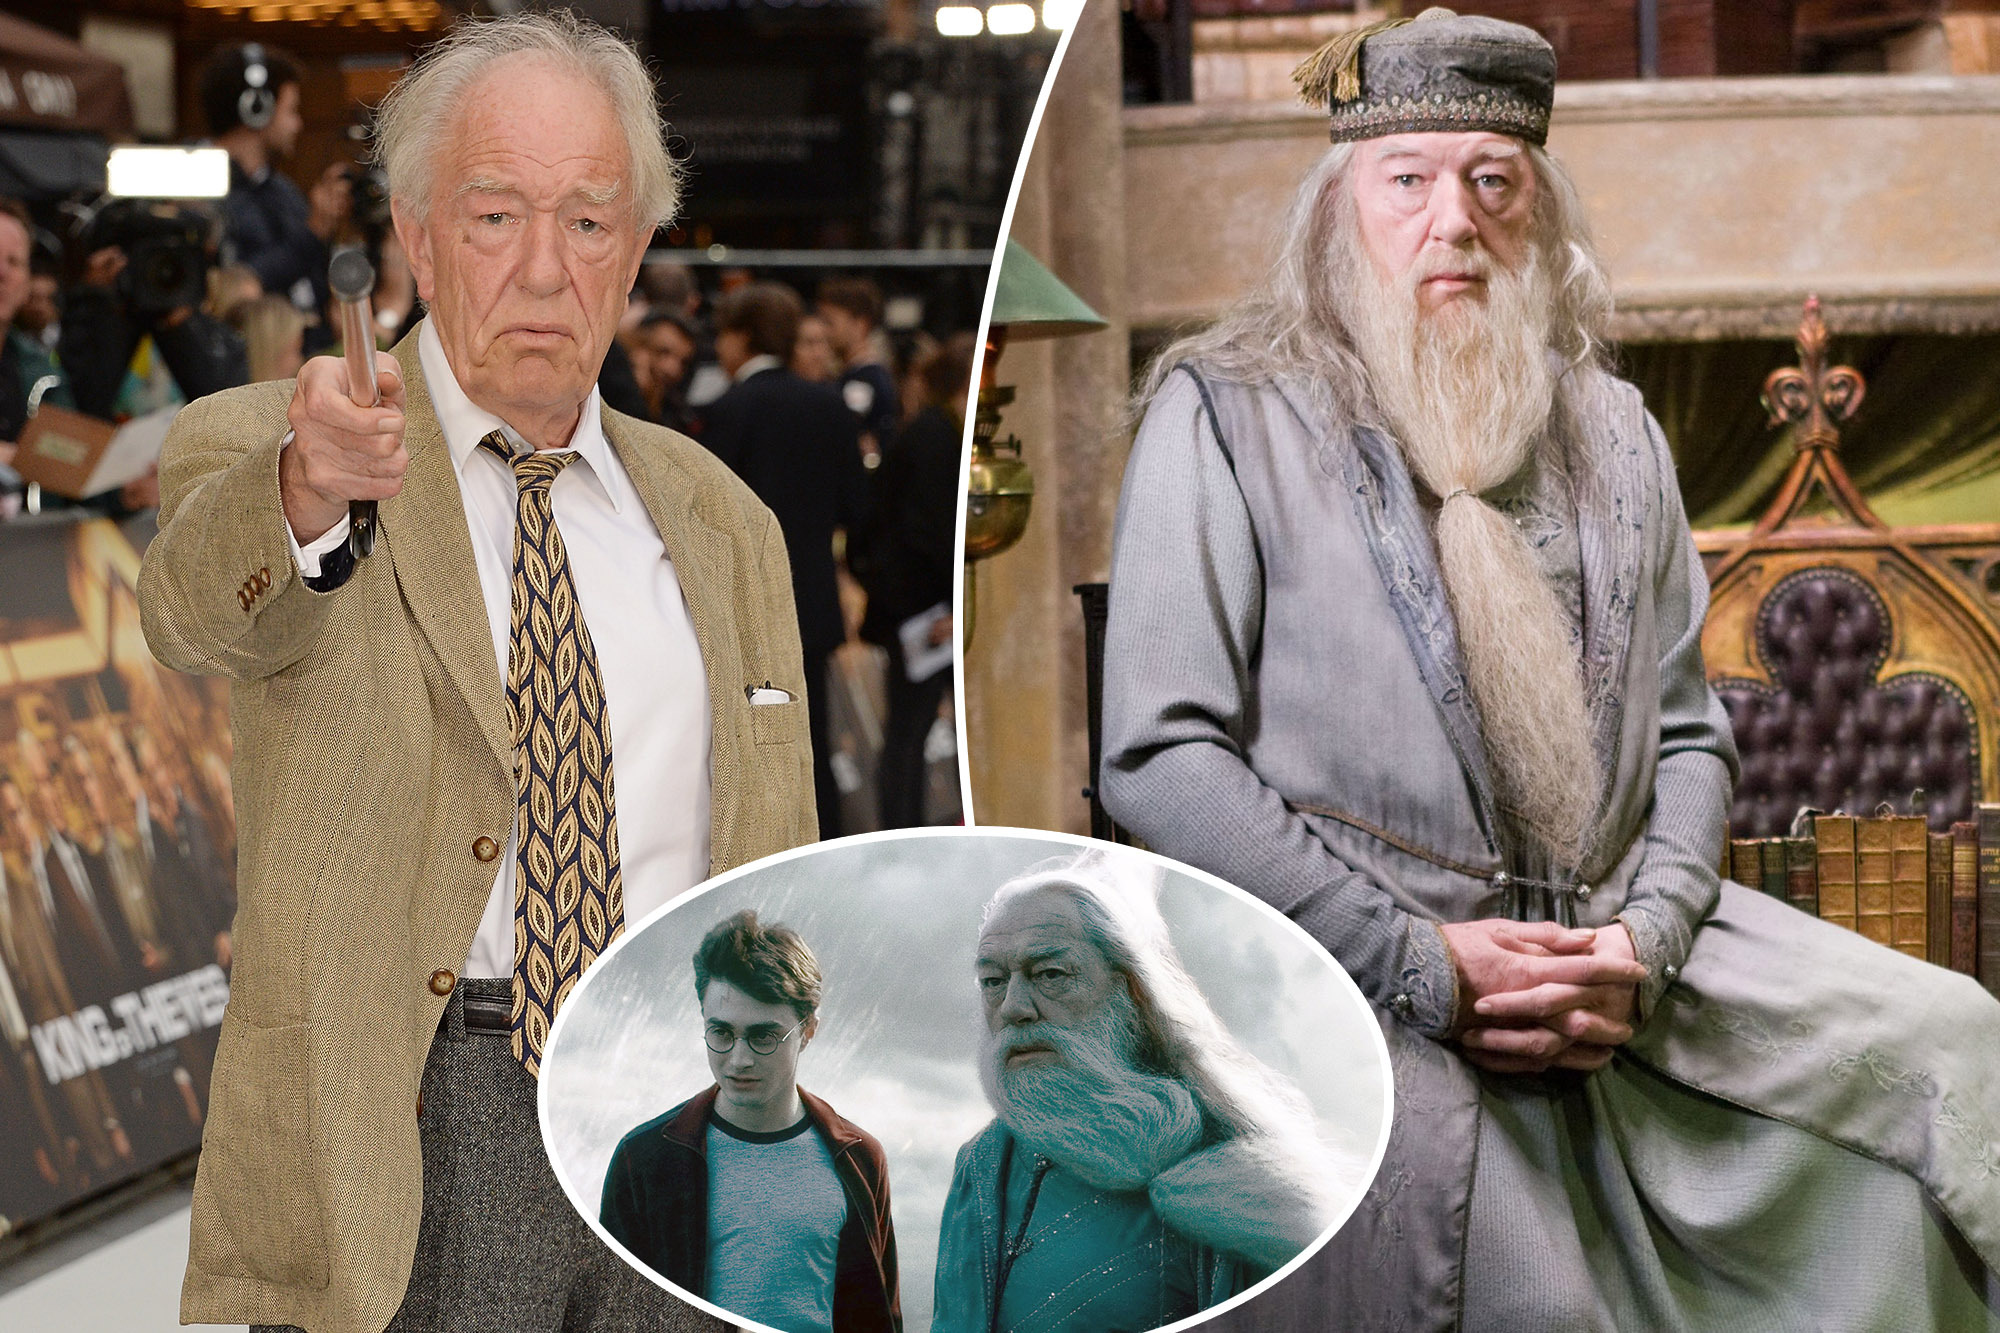 Actor Michael Gambon, Dumbledore From Harry Potter Films, Dies At 82